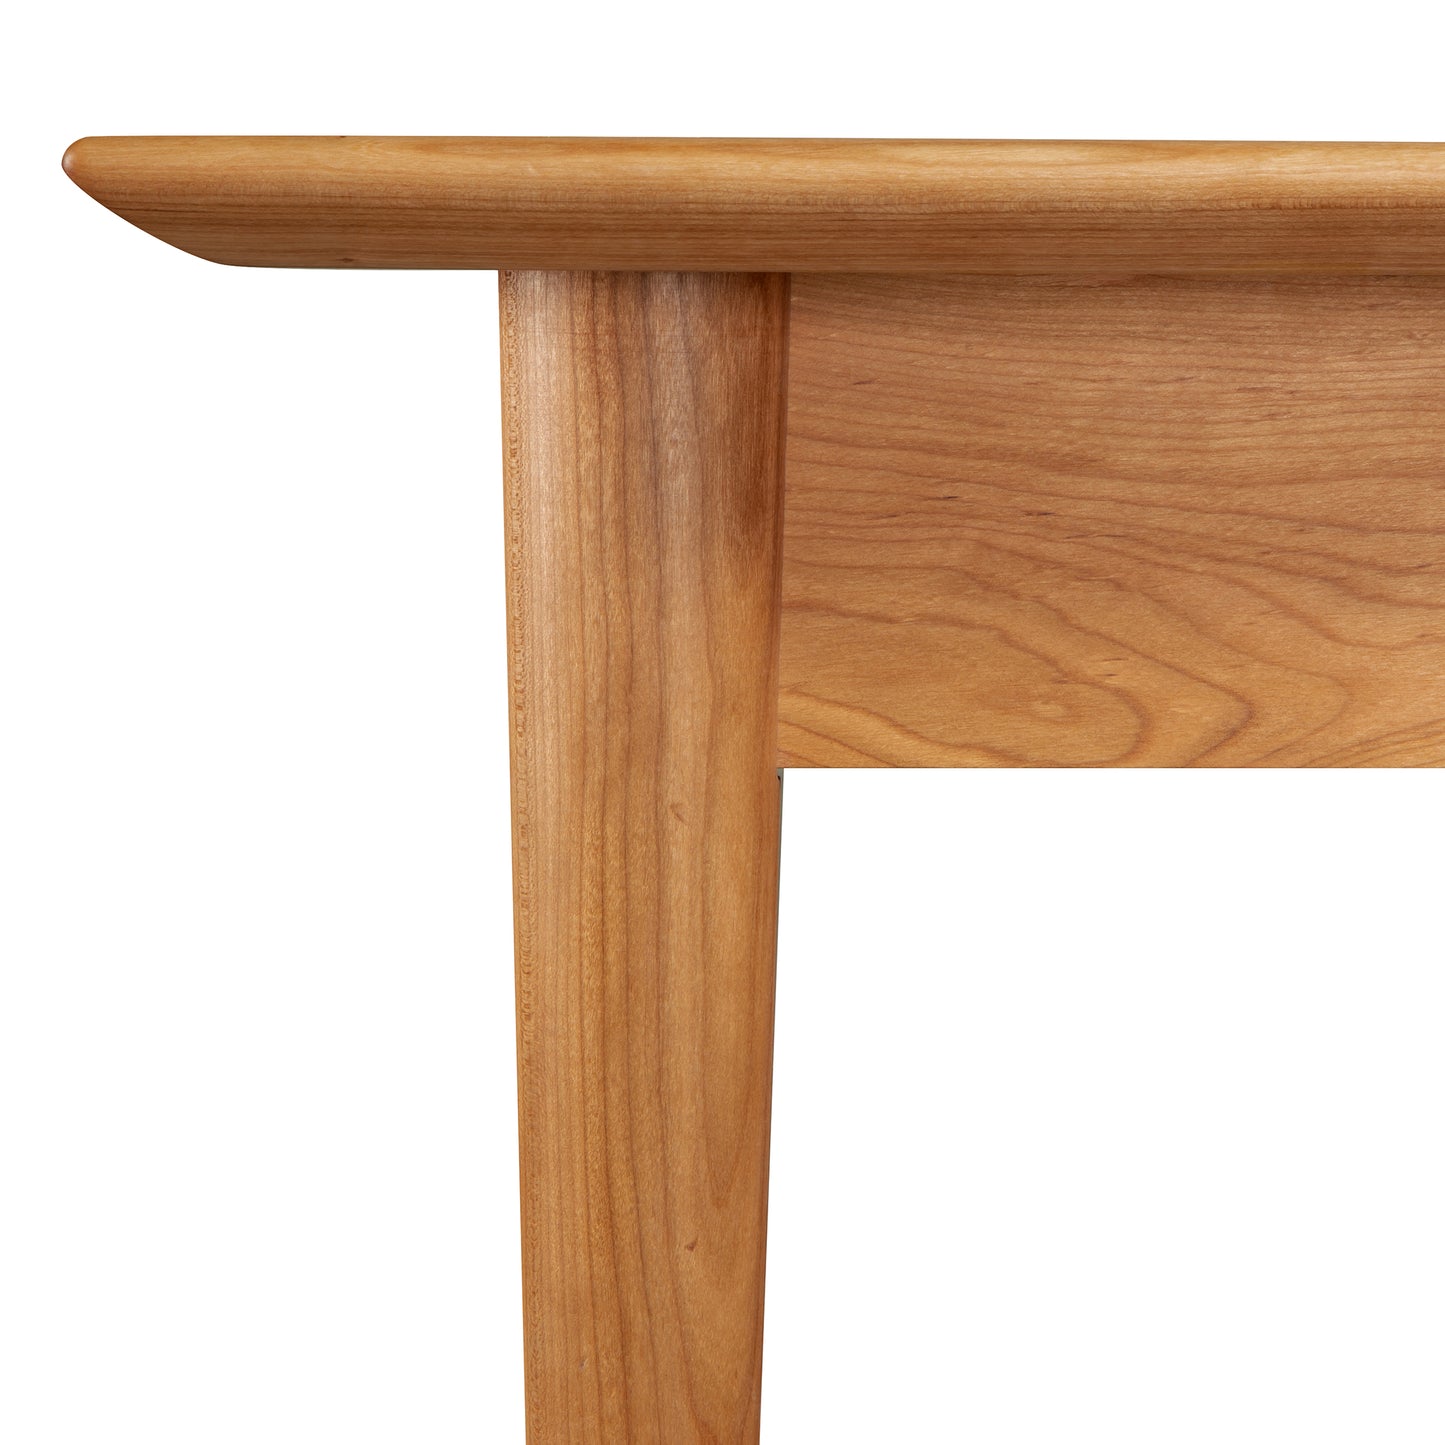 A close up of the Burke Modern Dining Table by Vermont Woods Studios, showcasing its craftsmanship.